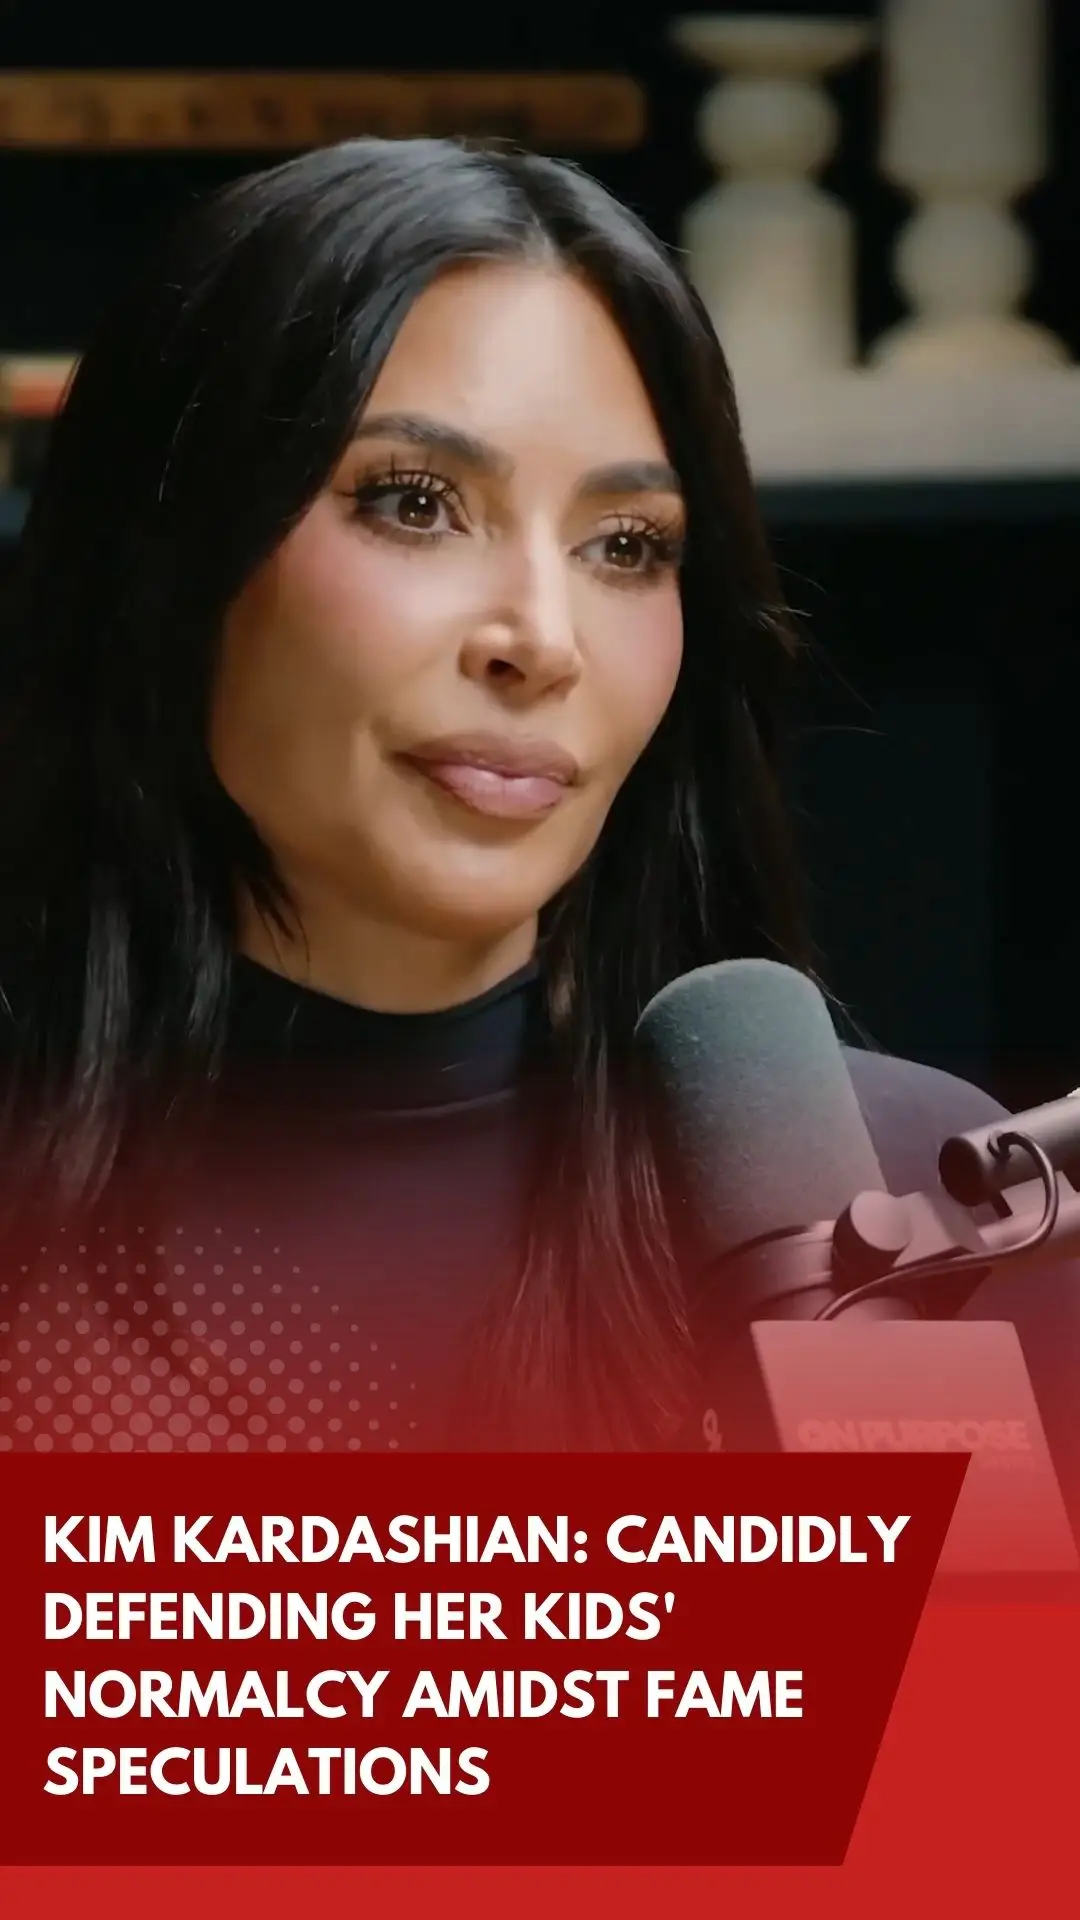 Kim Kardashian Candidly Defending Her Kids' Normalcy Amidst Fame Speculations